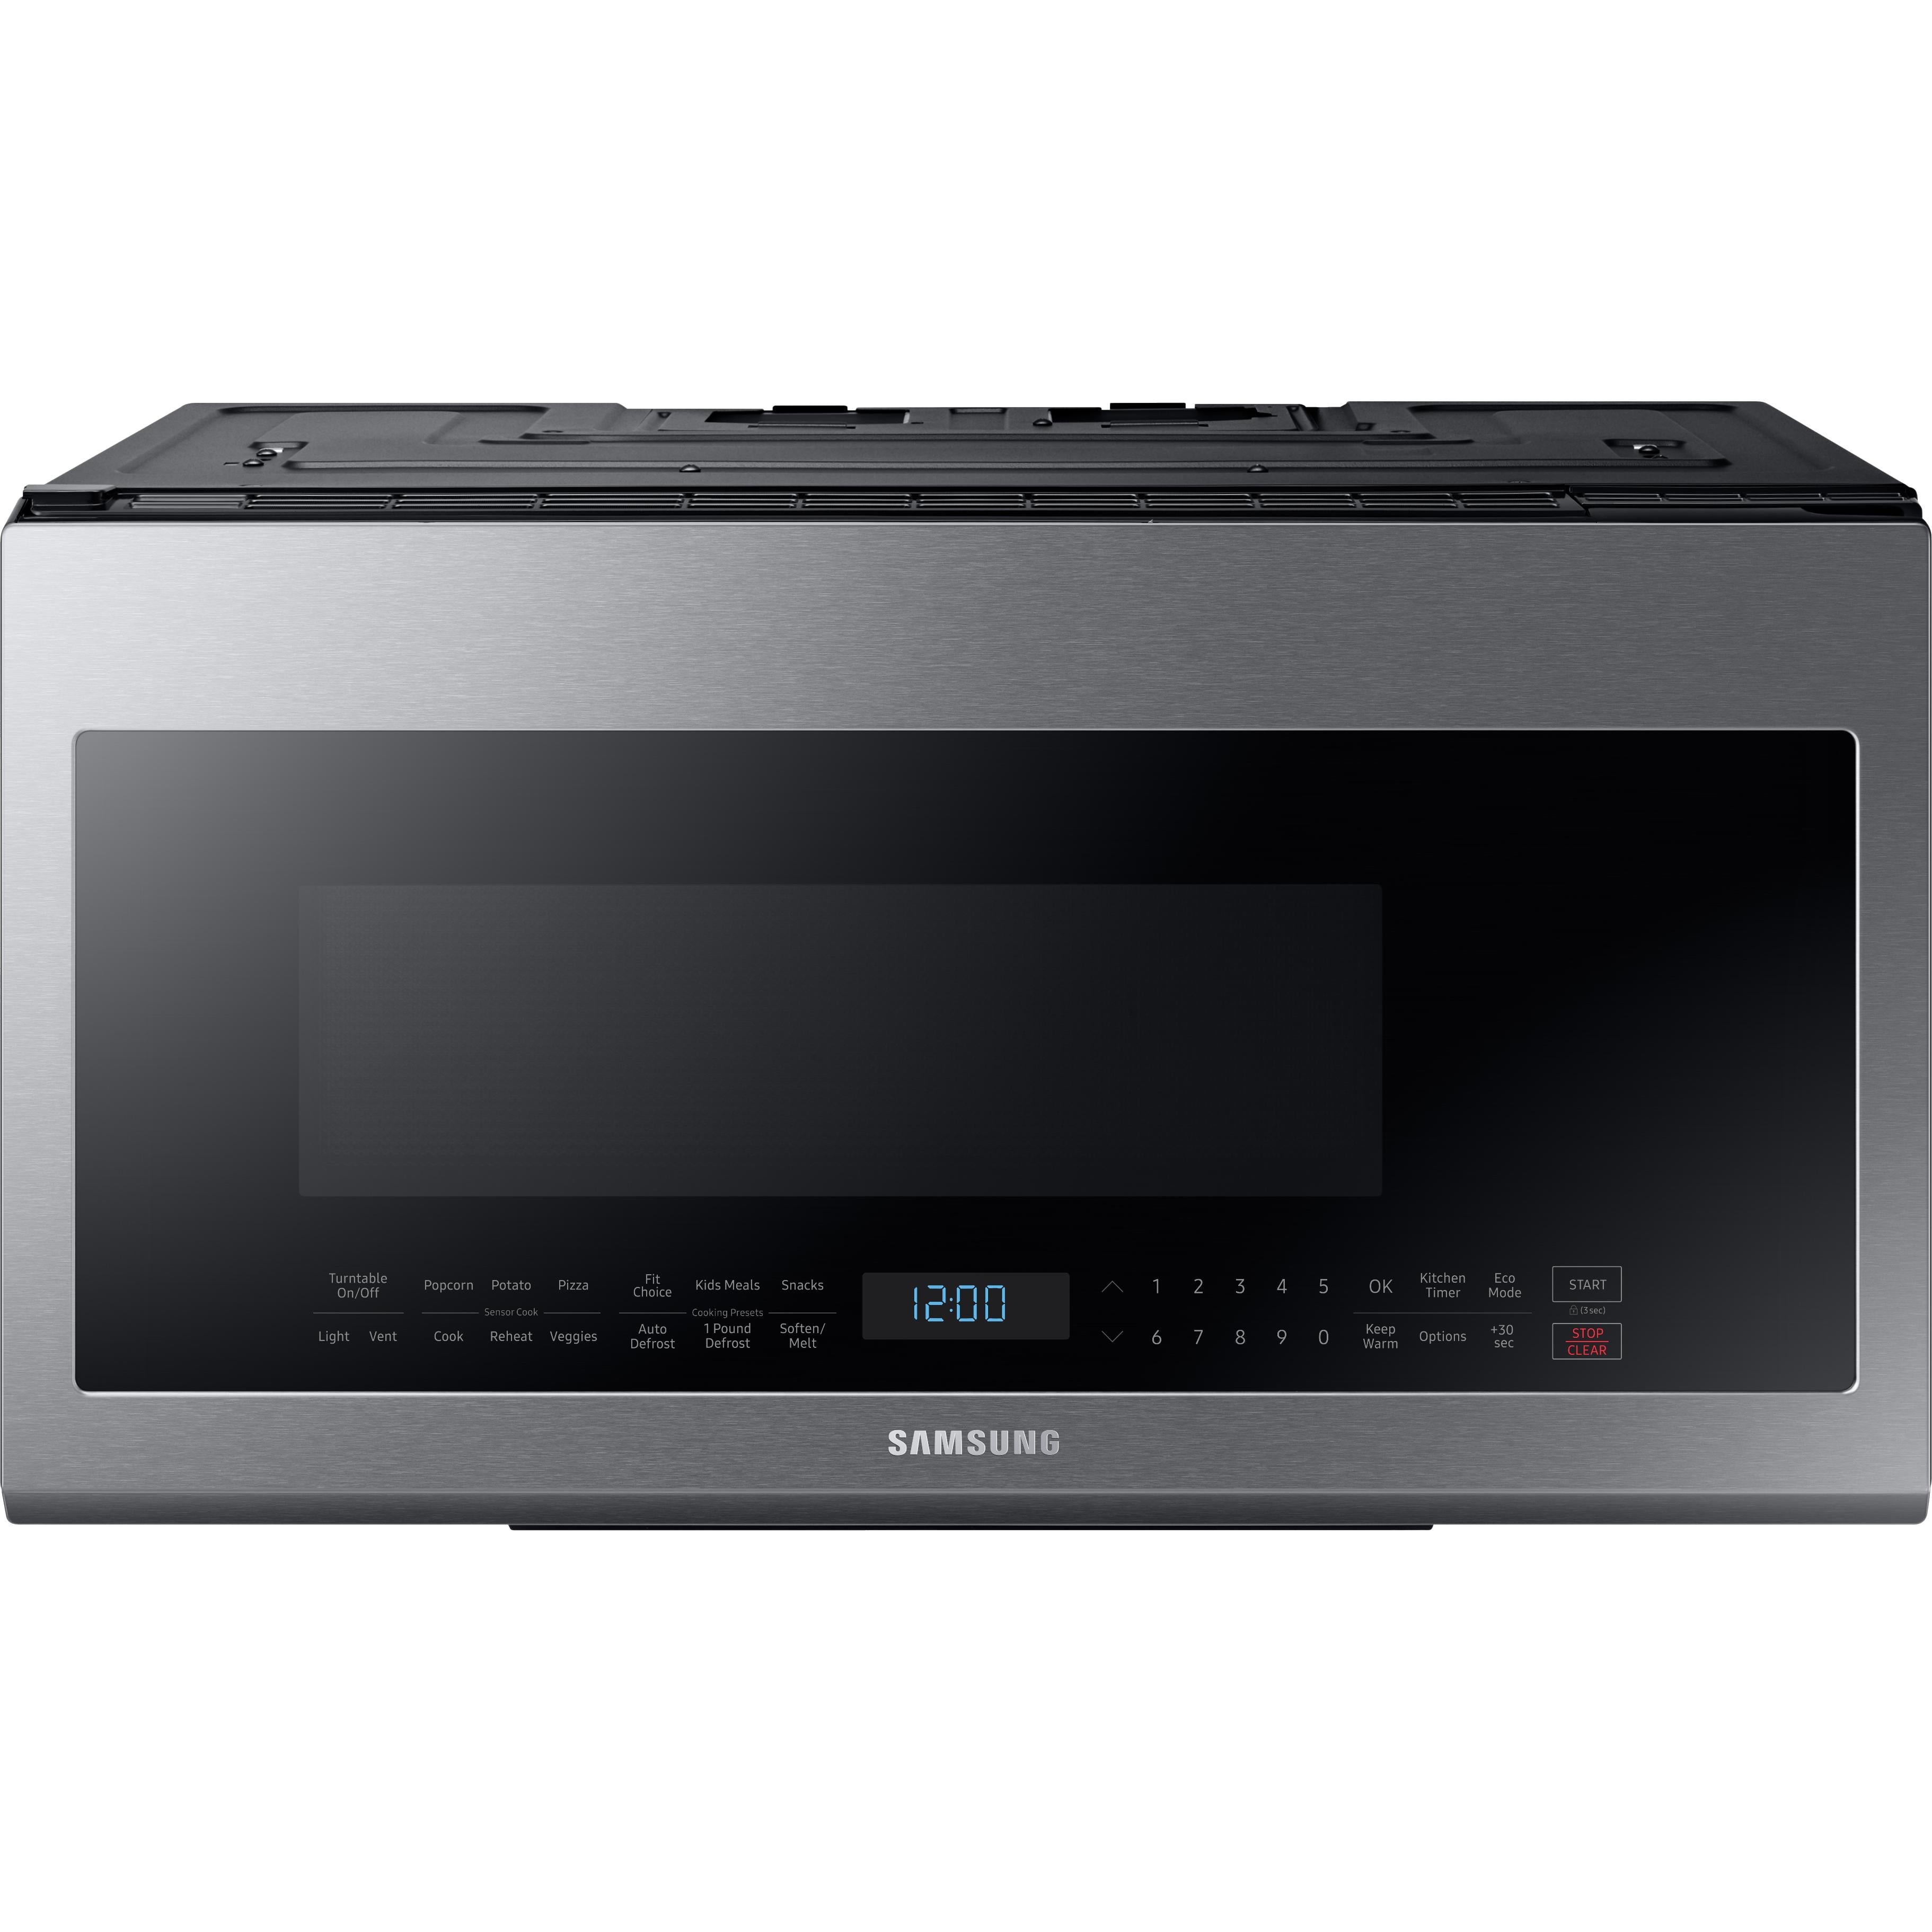 Samsung 30-inch, 2.1 cu.ft. Over-the-Range Microwave Oven with Ventilation System ME21M706BAS/AA